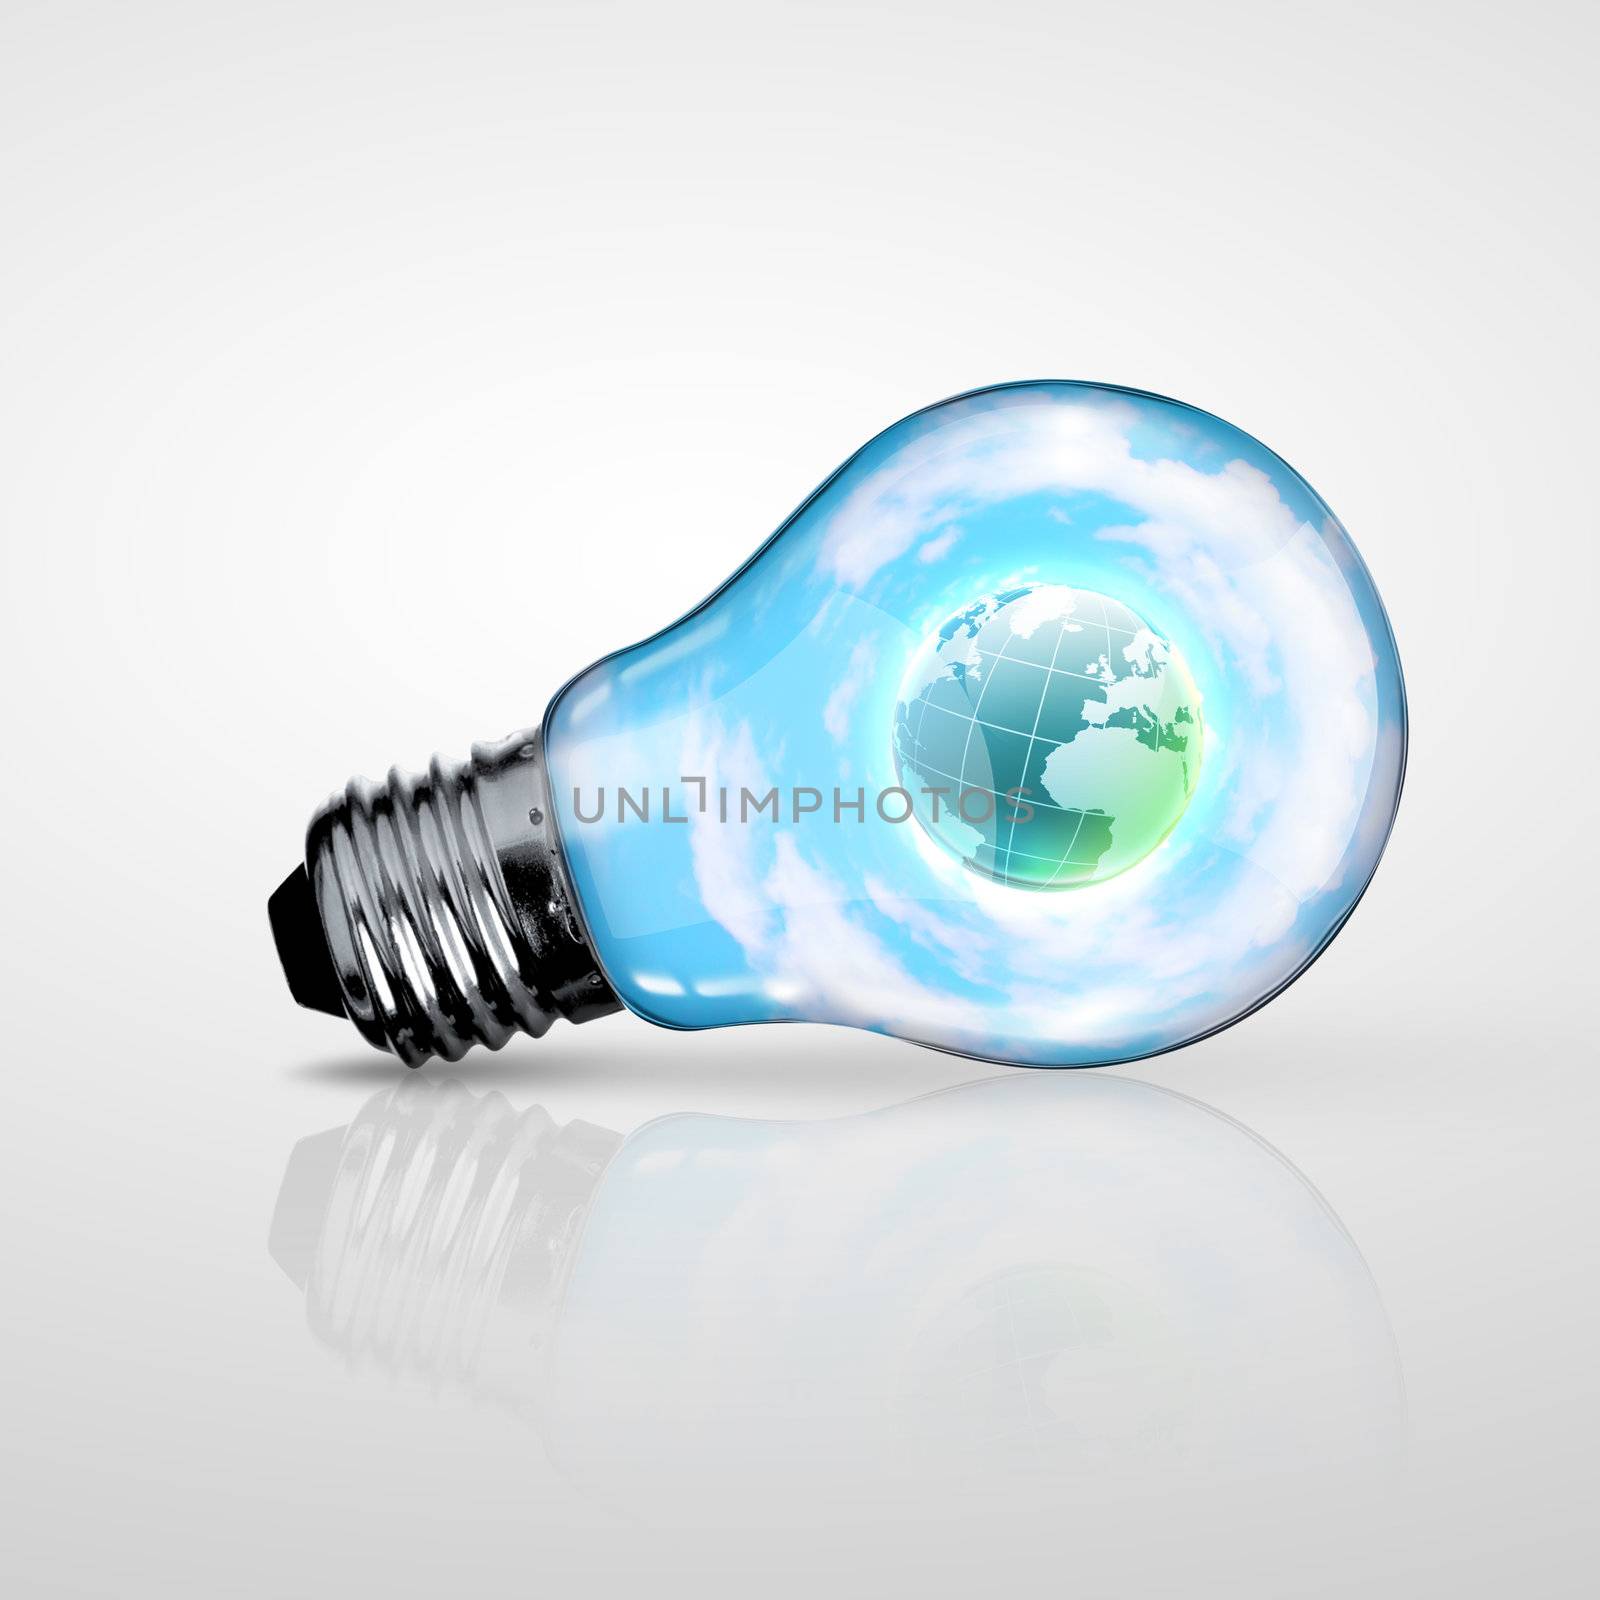 Electric light bulb and planet inside it by sergey_nivens